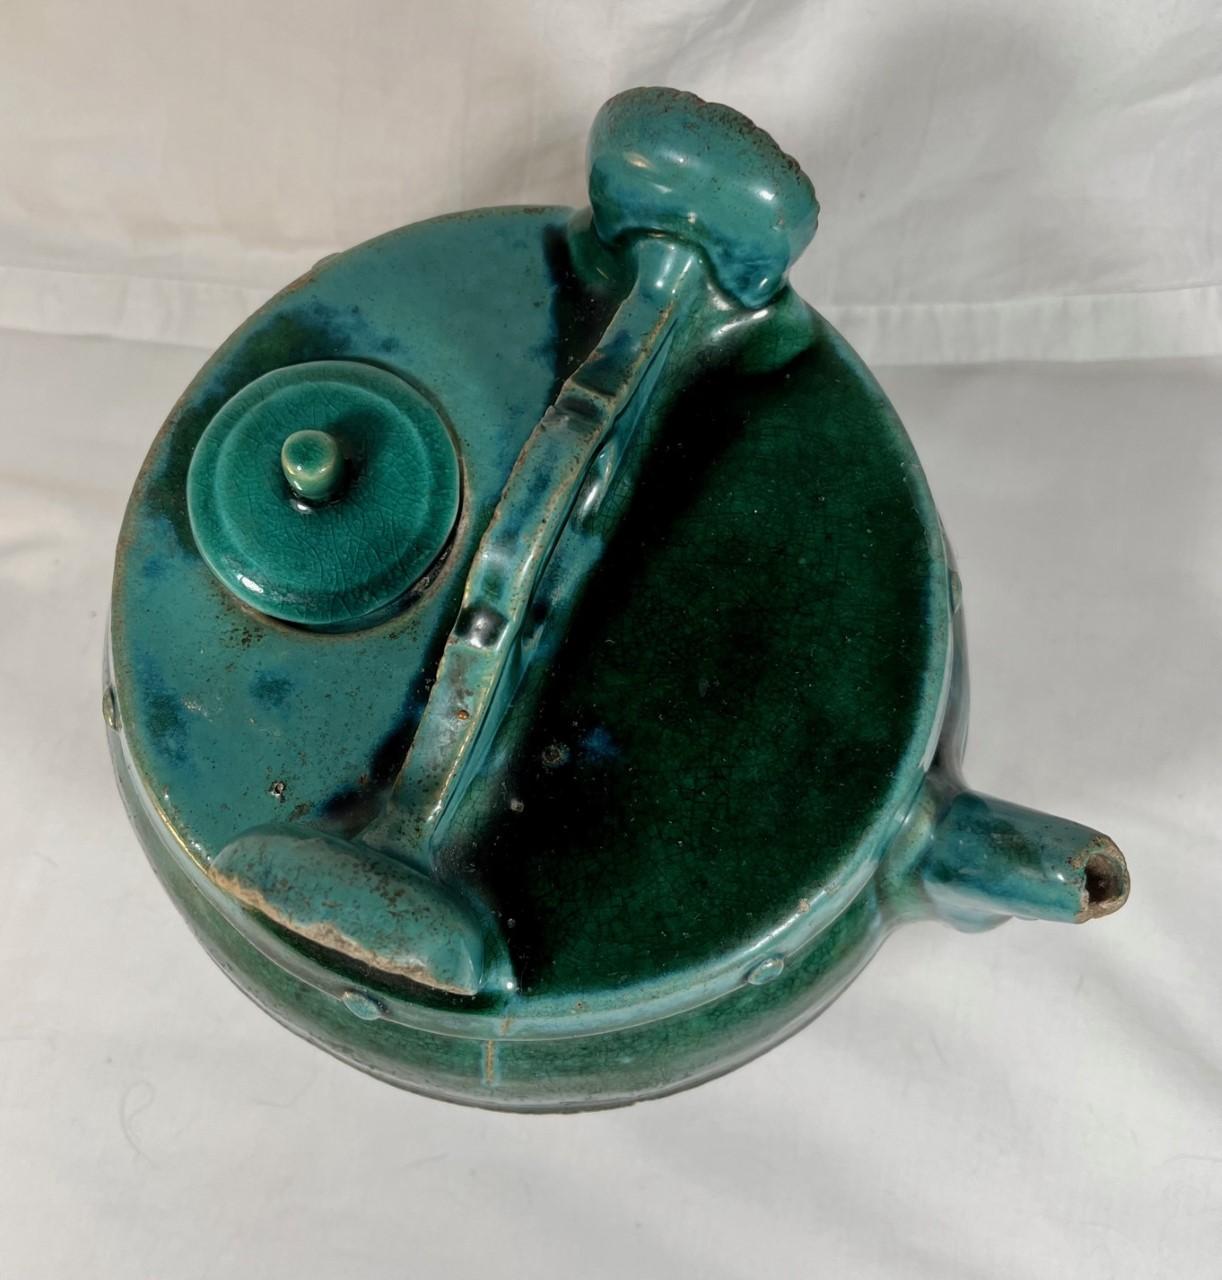 Antique Chinese Green Blue glazed Shiwan pottery teapot dates to China’s Kuang Hsu Dynasty and is of the late 19th century. The vibrant teal-green glaze pot features a pouring spout, a carrying or suspension handle and original lid. Teapots such as